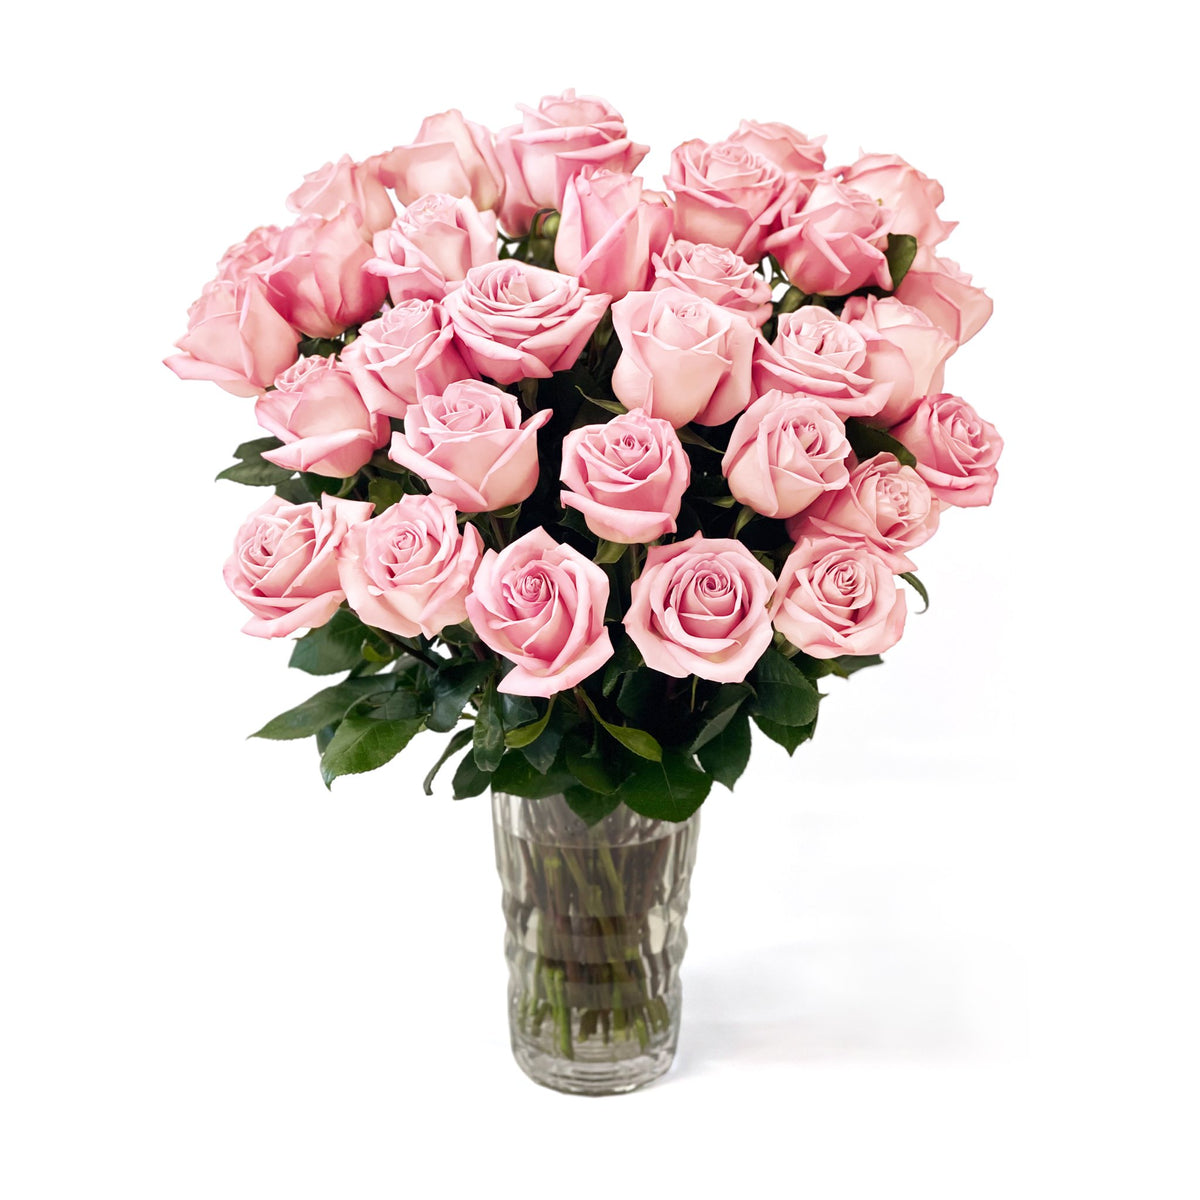 Queens Flower Delivery - Fresh Roses in a Crystal Vase | Light Pink